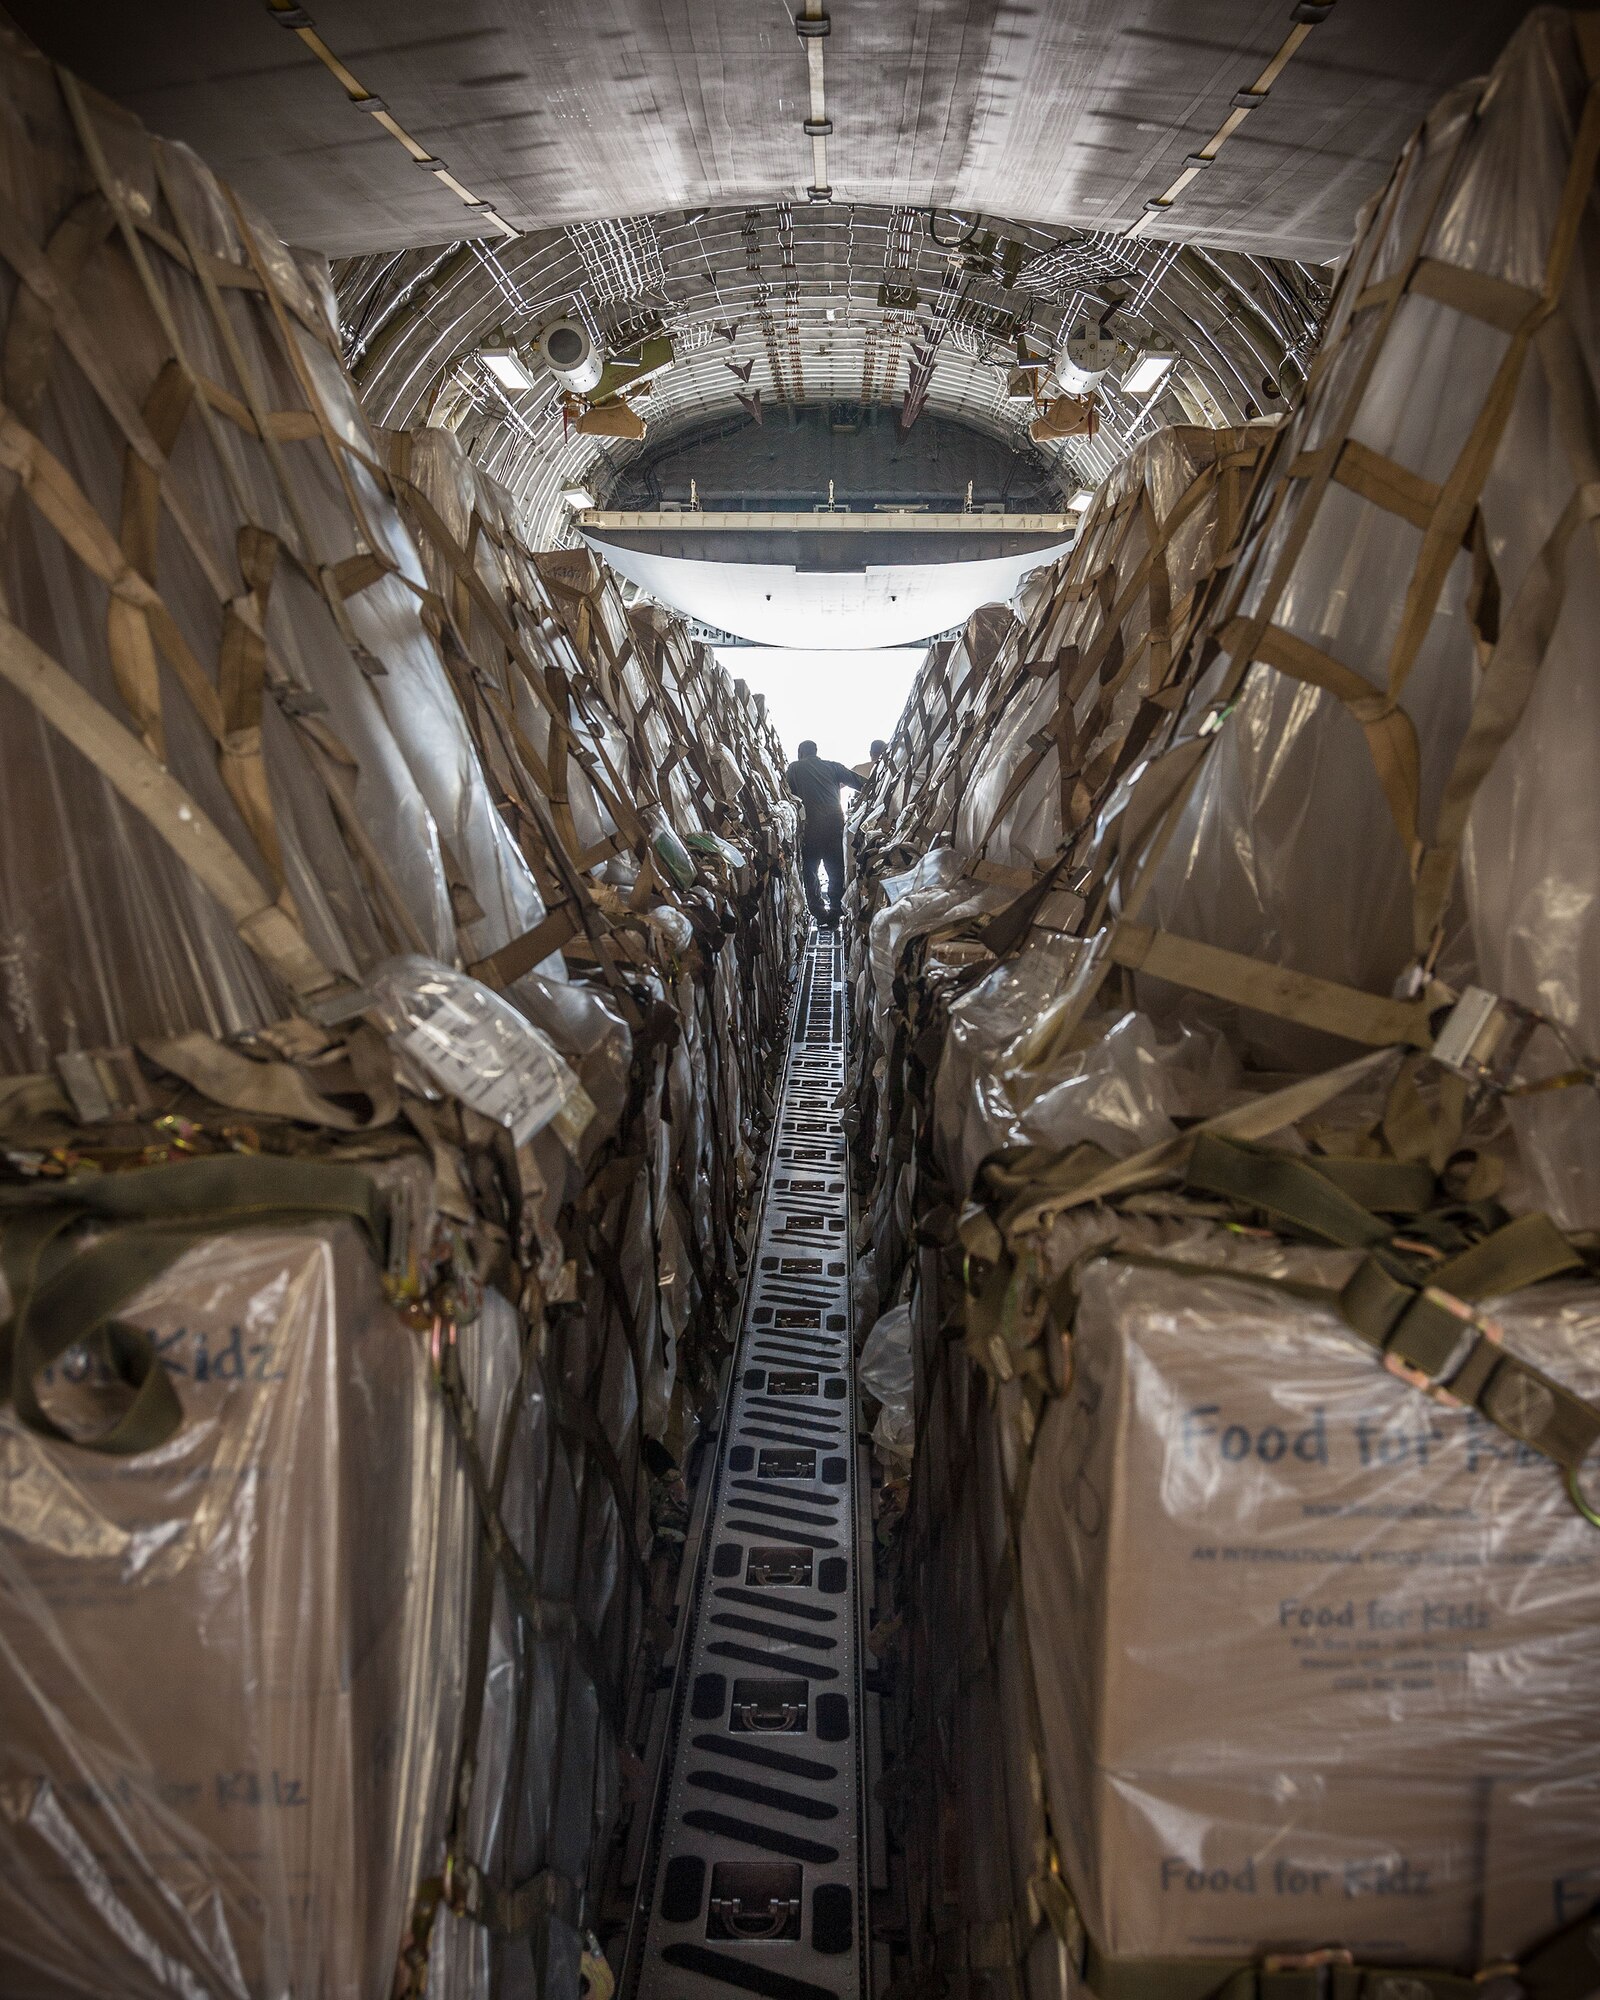 Airmen from the 27th Aerial Port Squadron load humanitarian aid pallets onto a C-17 Saturday morning at the Minneapolis-St. Paul Air Reserve Station, Minn.  The over 90,000 lbs of food from relief organization Food For Kidz will be sent to Kabul, Afghanistan, utilizing the Denton Program which allows donors to put humanitarian supplies aboard U.S. military transport on a space-available basis.  (U.S. Air Force photo/Shannon McKay)